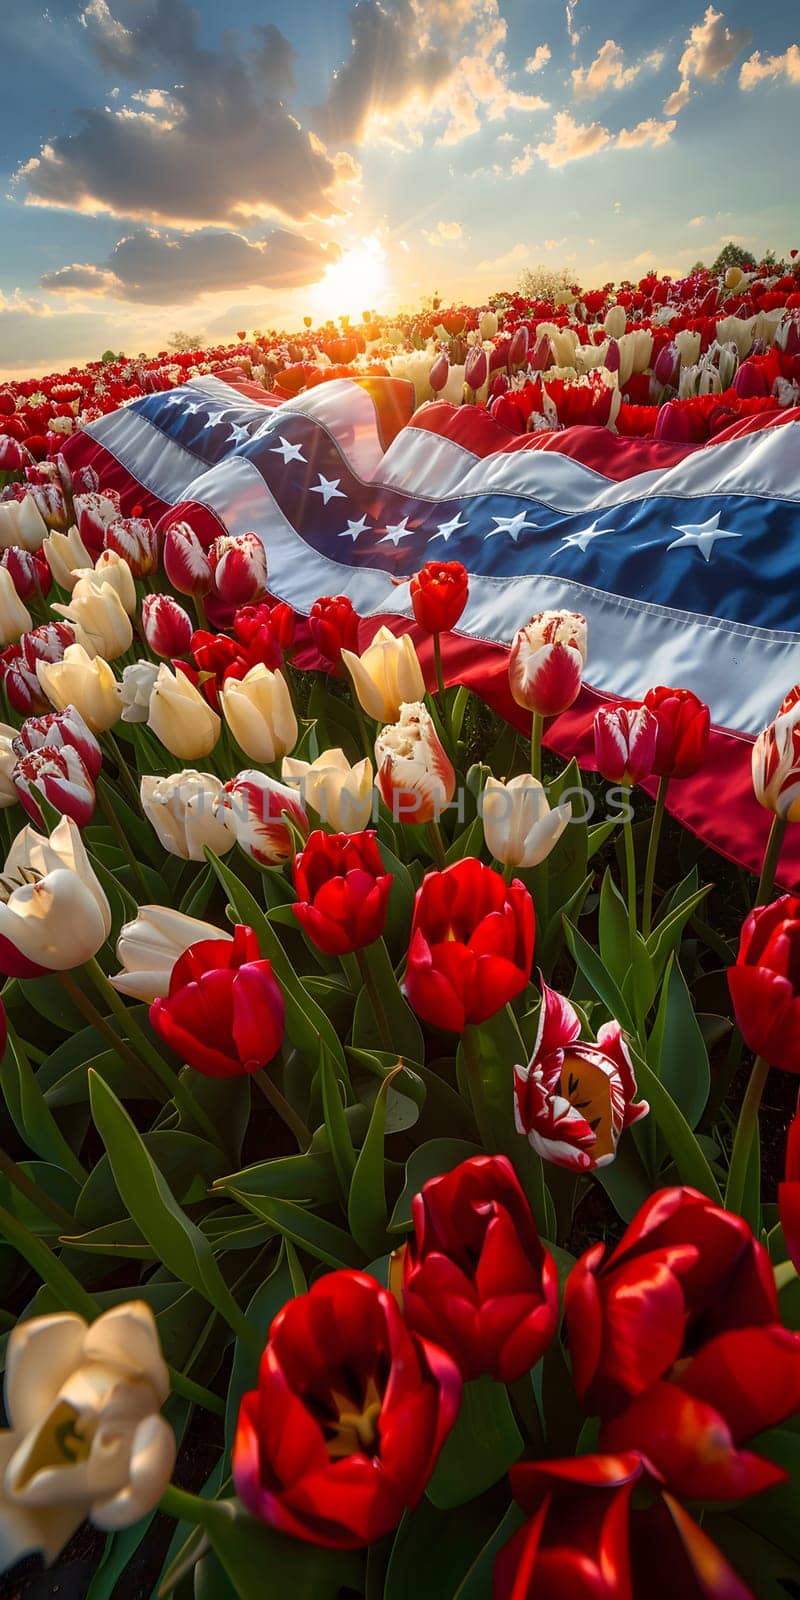 A stunning field of red and white tulips with an American flag as the backdrop, creating a patriotic and picturesque natural landscape